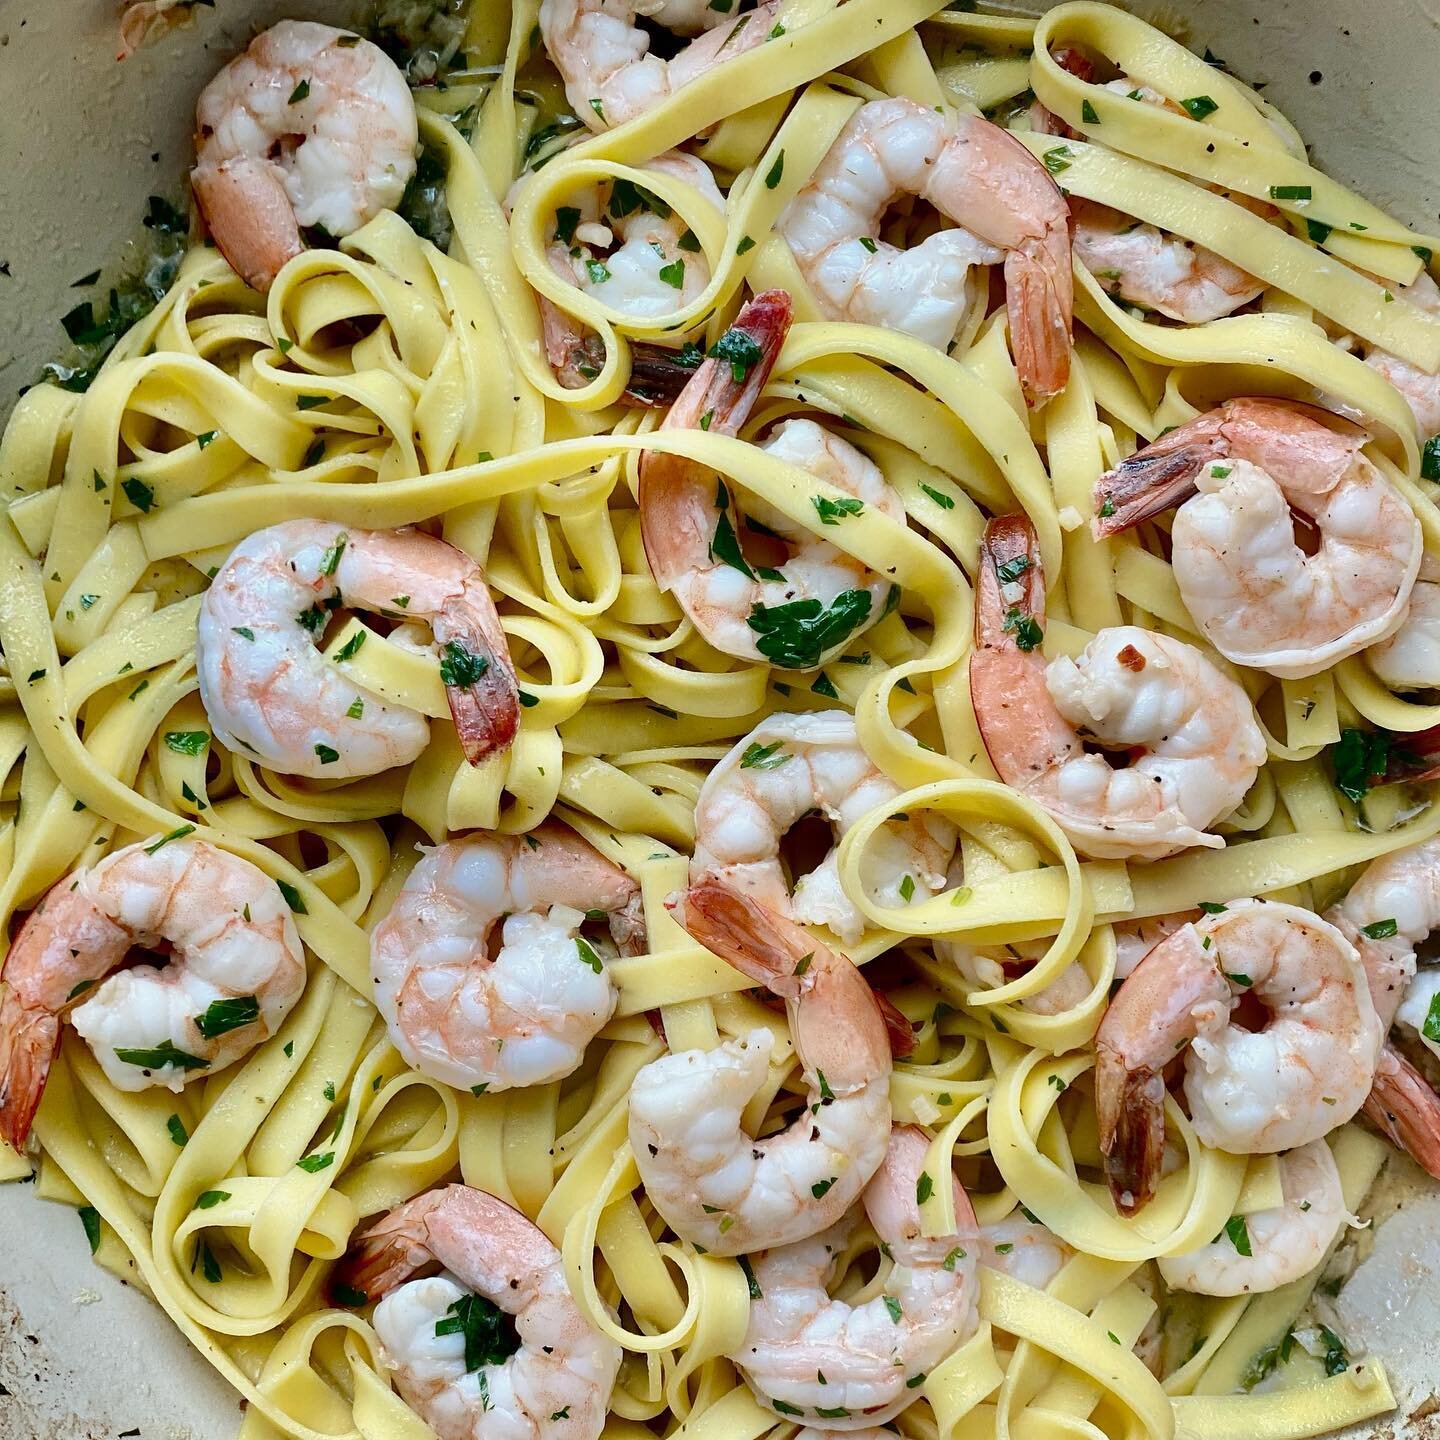 learn to make the classics! on sunday may 23rd at 3:30pm, i will be teaching two classic dishes: caesar salad and shrimp scampi. this is the perfect date night dish, impress your friends dinner party dish, or even treat yourself dish. this class is $